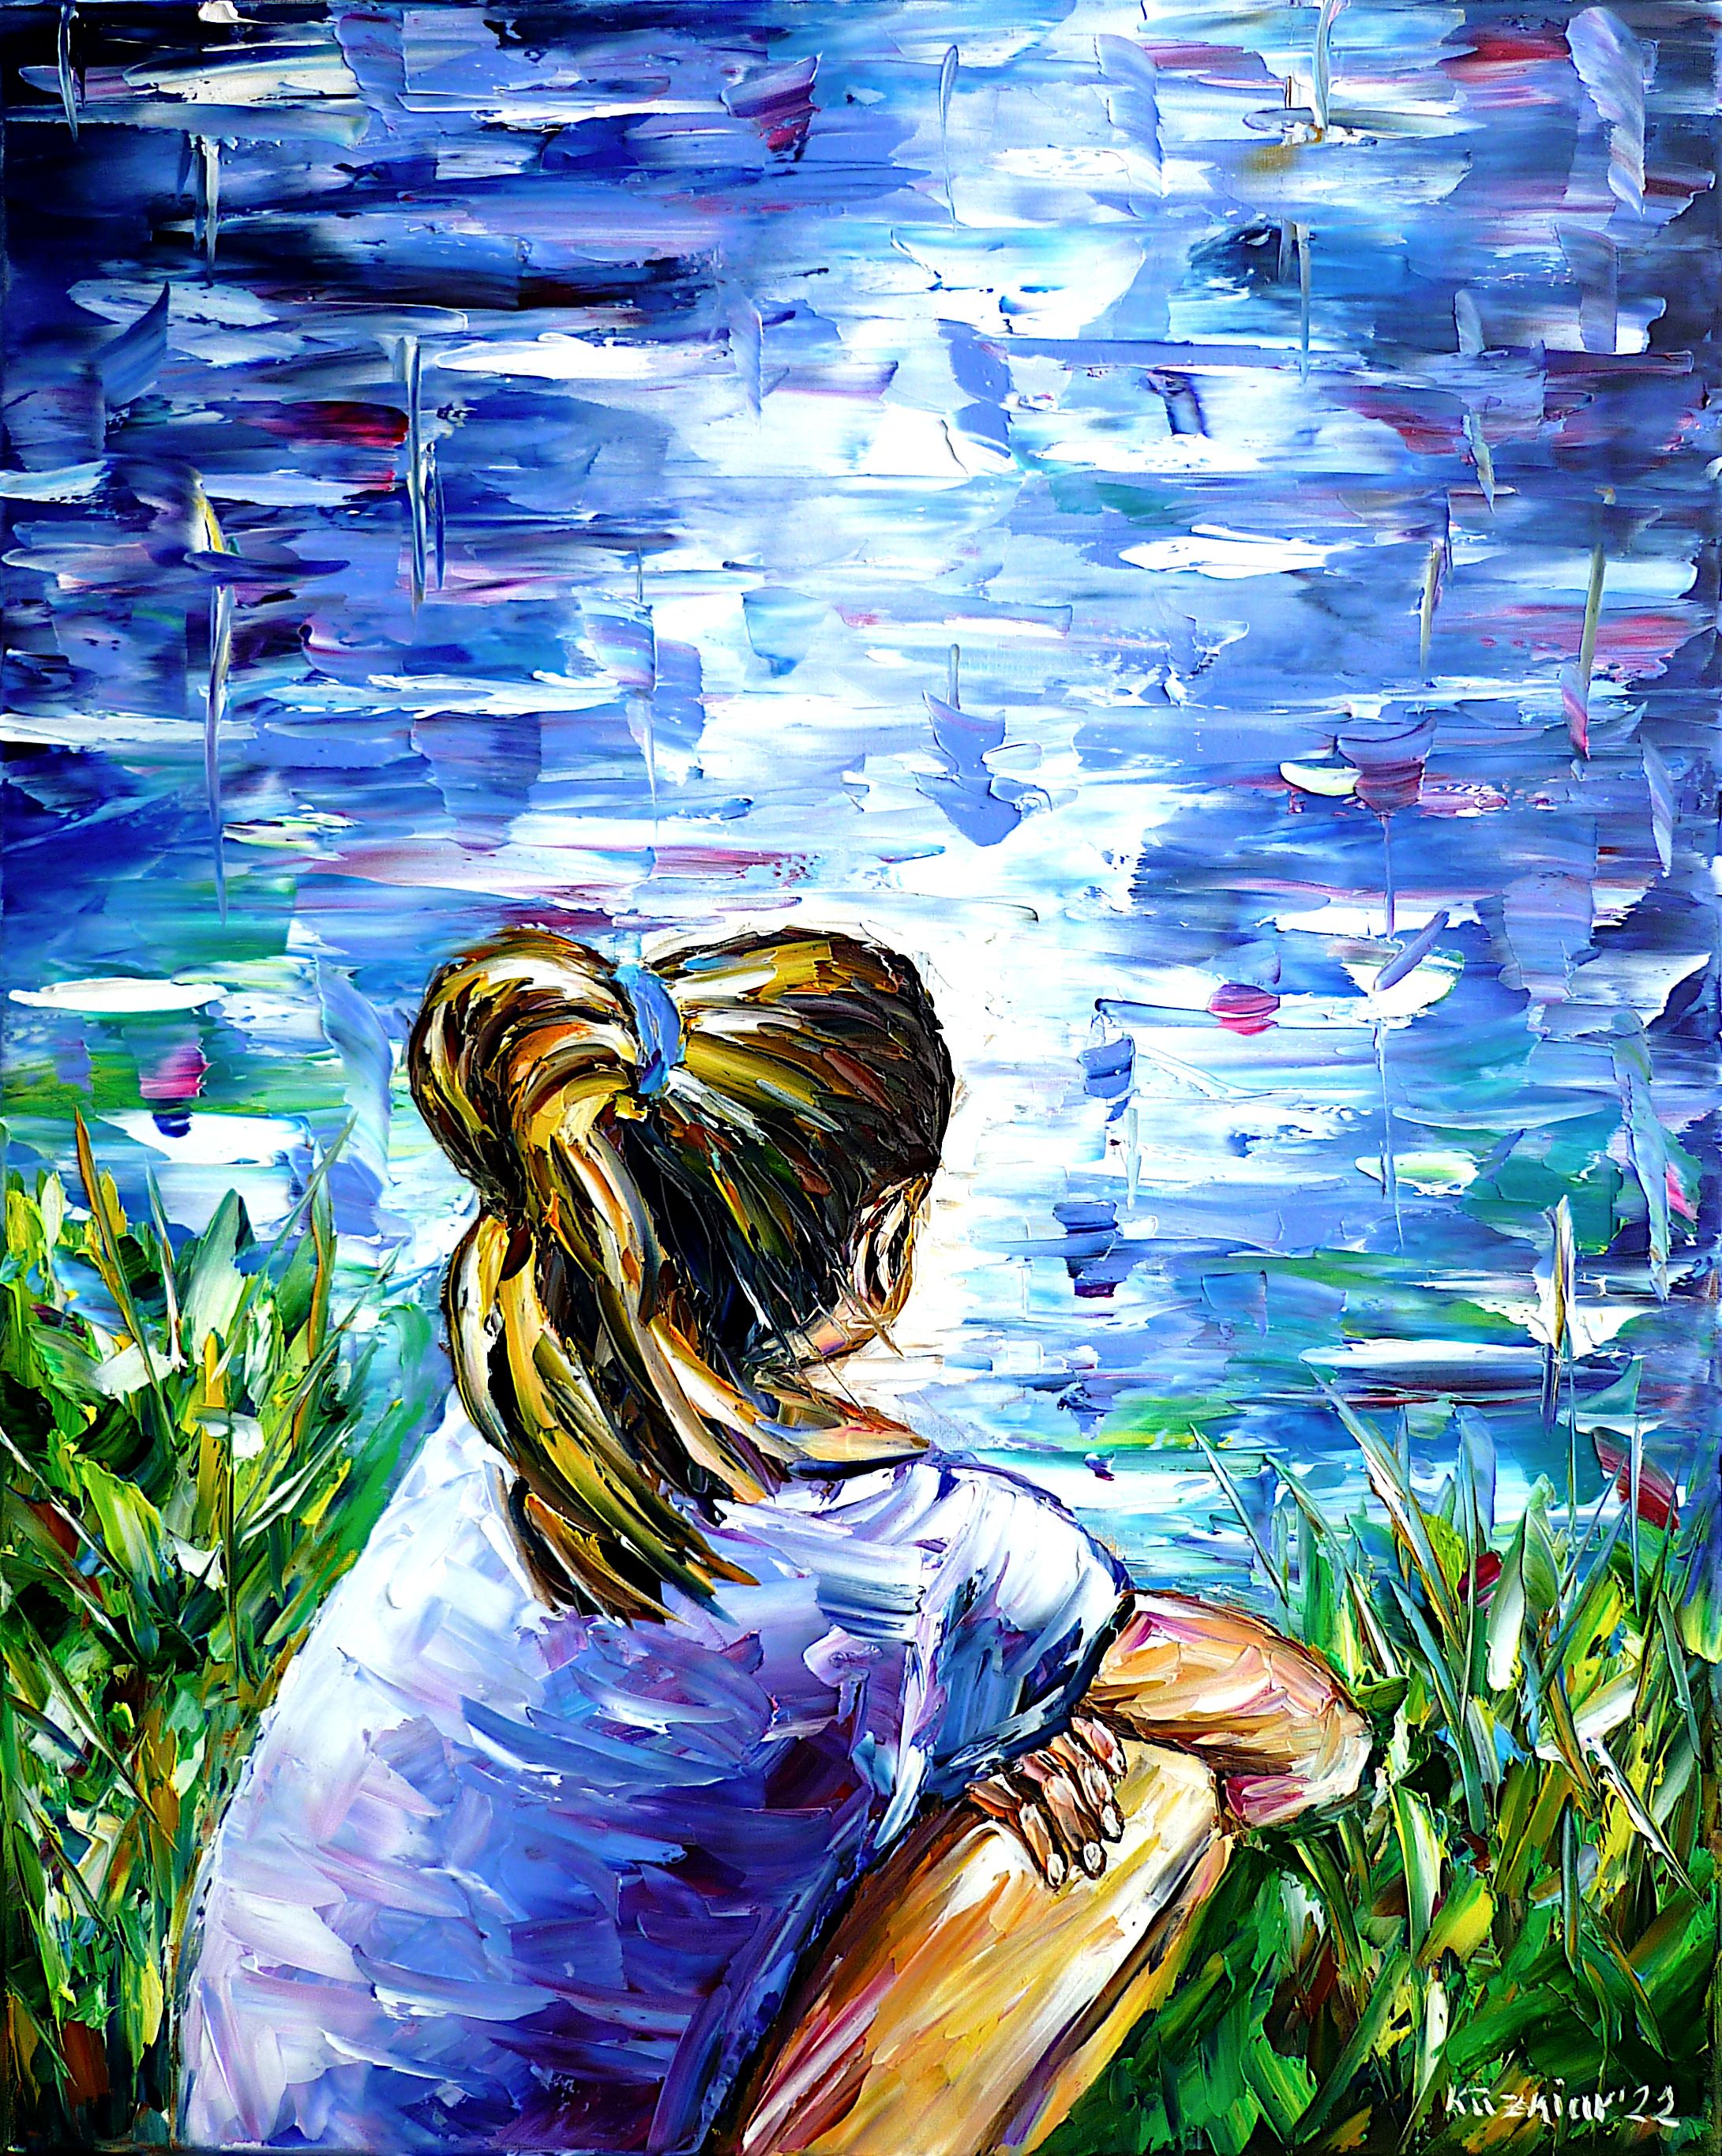 young girl,sitting in the grass,girl in the grass,on the lake shore,lonely girl,looking into the distance,loneliness,teenager,sadness,sad girl,lonely people,sad,sad people,longing for,longing,being alone,sitting by the lake,girl by the water,sitting by the water,lovesickness,lakescape,missing,come back please,i miss you,i love you,i long for you,first love,young love,where are you,why,girl from behind,pain,children painting,children picture,palette knife oil painting,modern art,impressionism,expressionism,abstract painting,lively colors,colorful painting,bright colors,light reflections,impasto painting,figurative